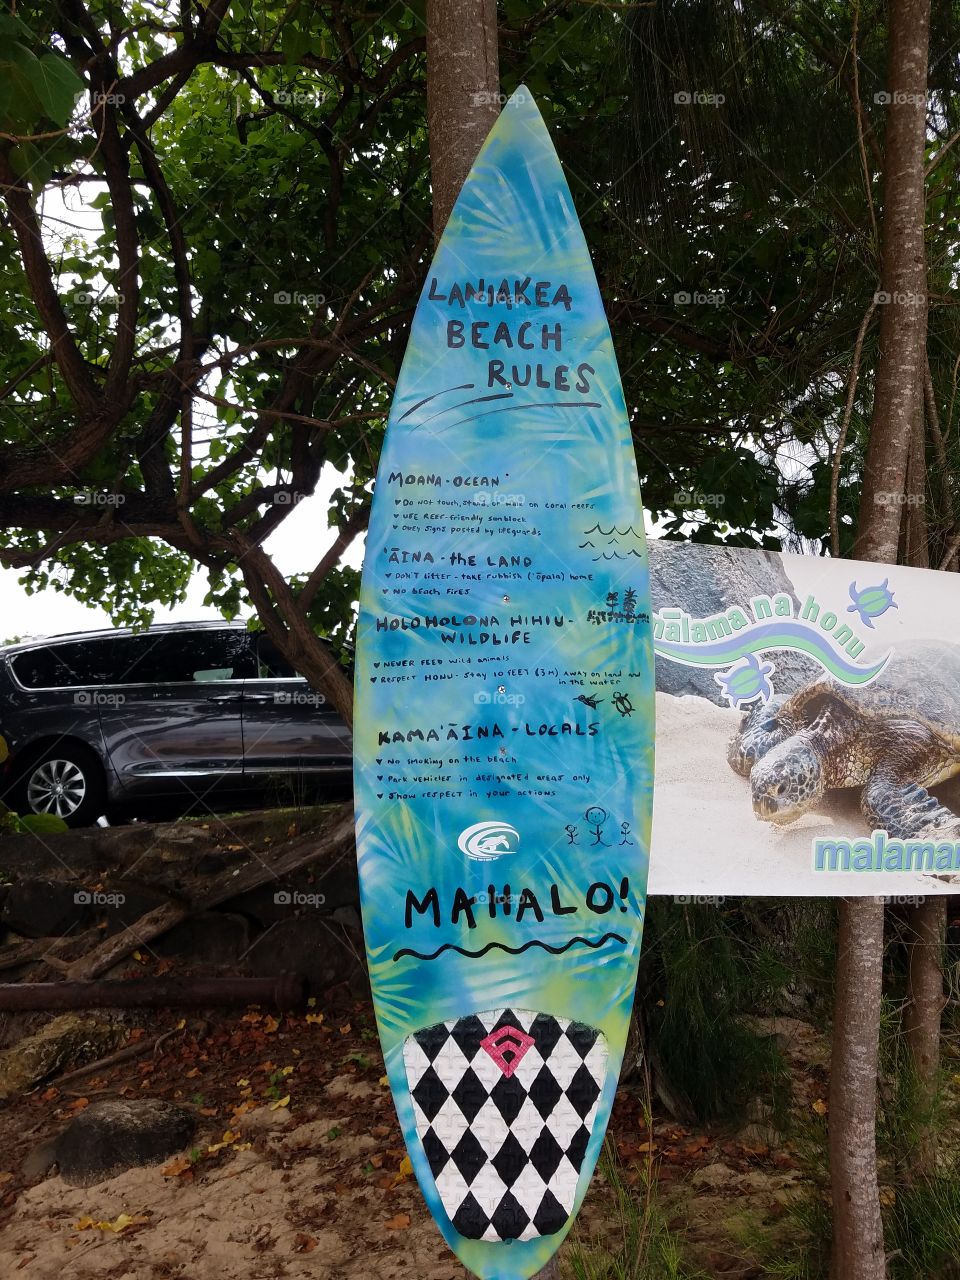 Beach rules posted on surf board